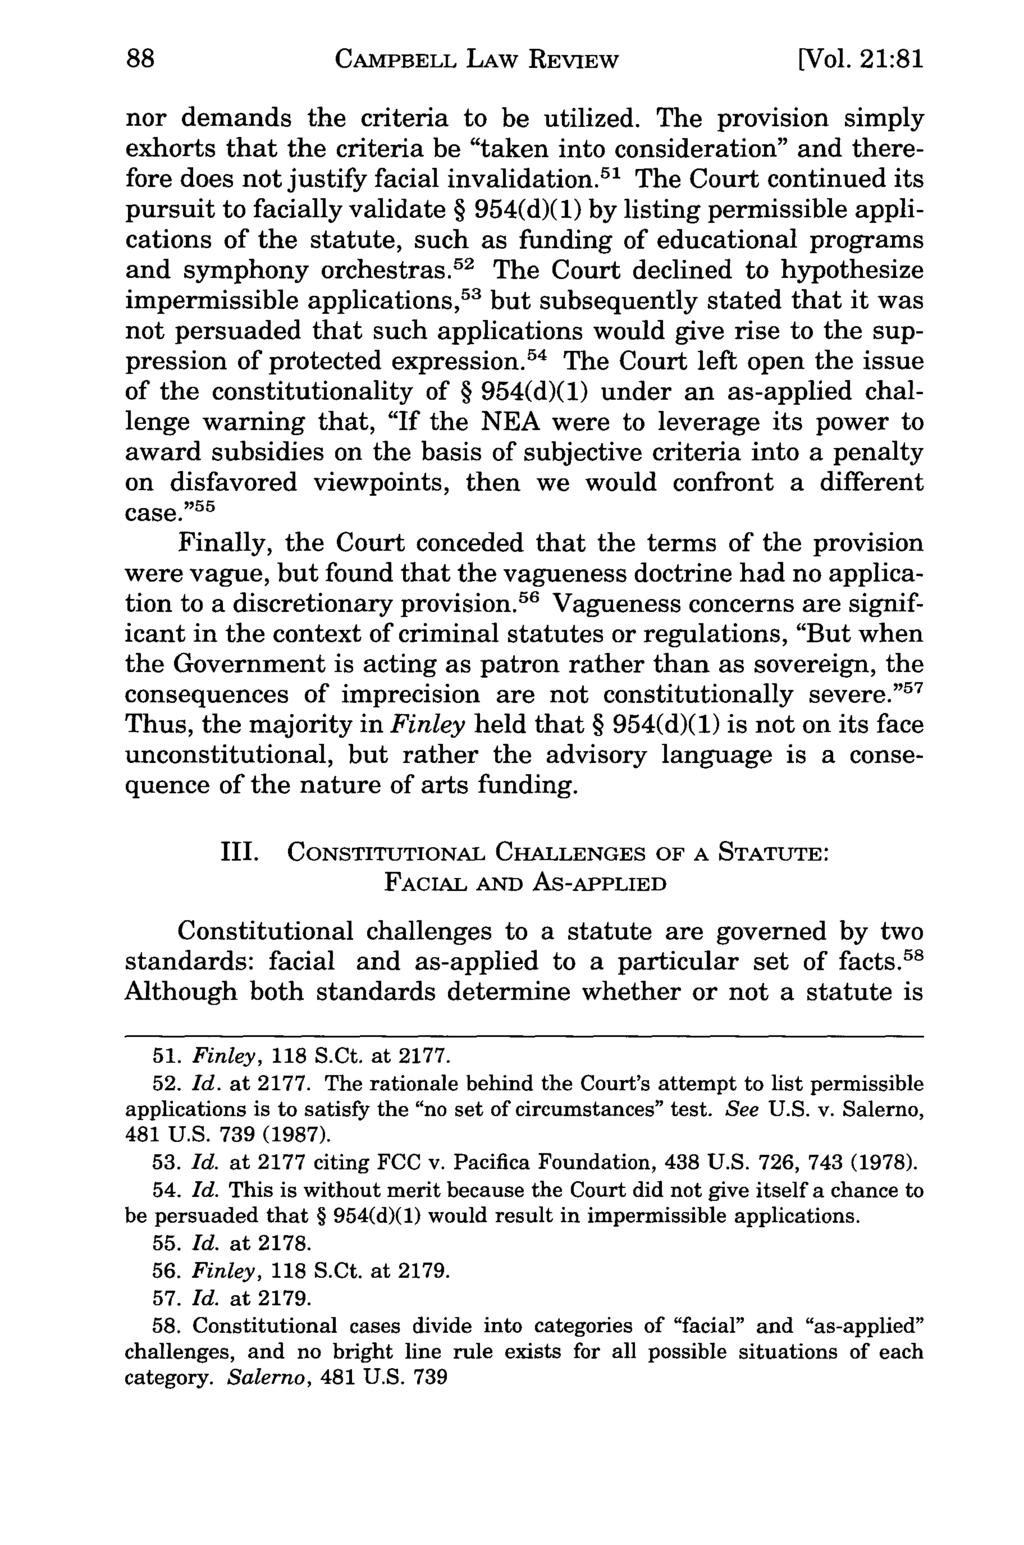 Campbell CAMPBELL Law Review, LAW Vol. REVIEW 21, Iss. 1 [1998], Art. 7 [Vol. 21:81 nor demands the criteria to be utilized.